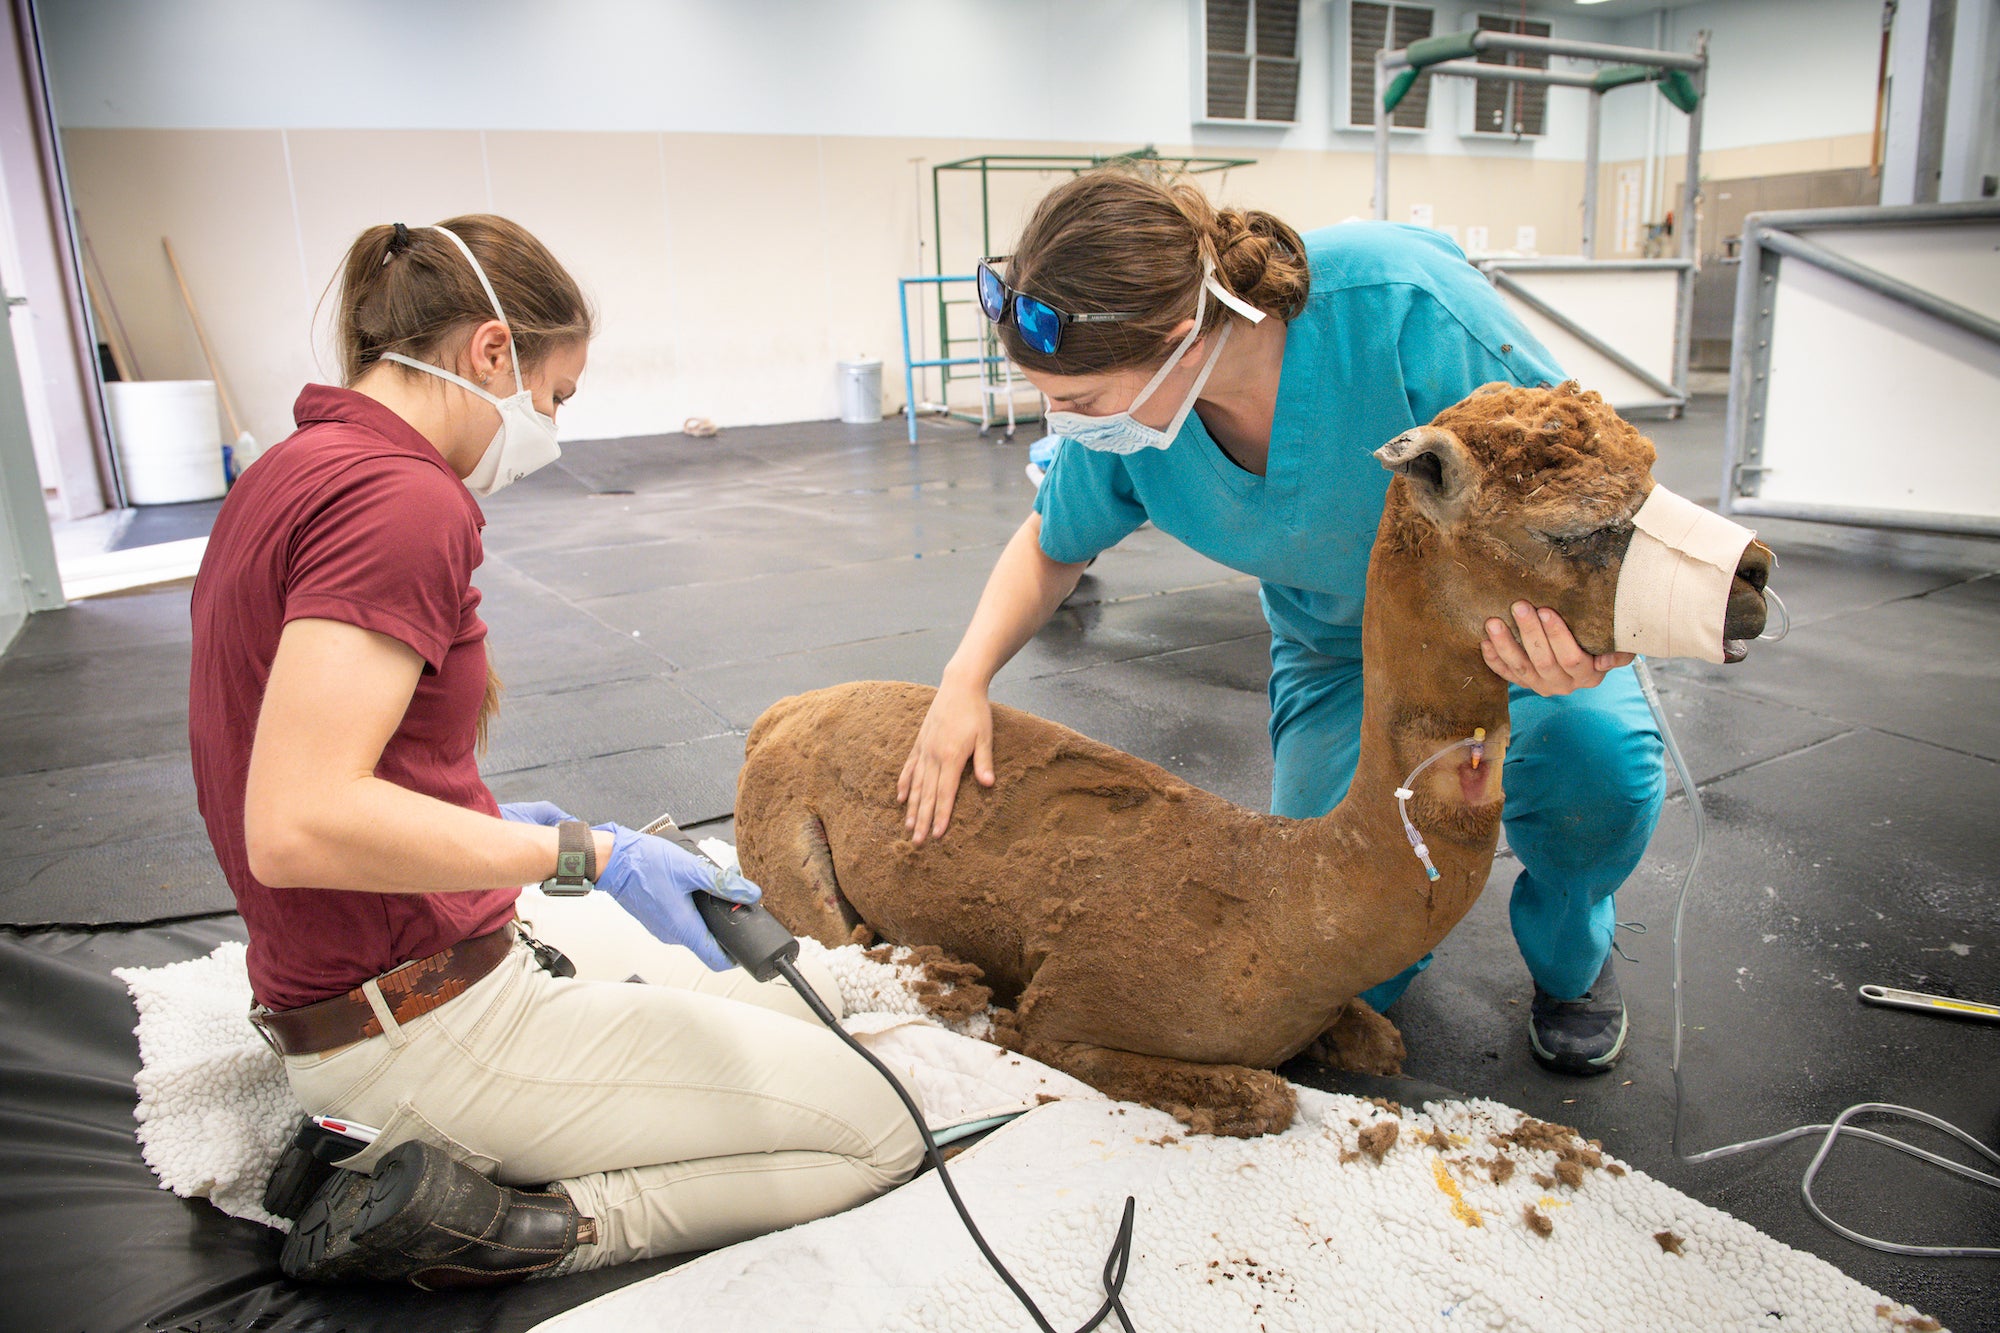 Two female veterinarians treat a brown alpaca with bandages on its face and its wildfire burns in a veterinary hospital.